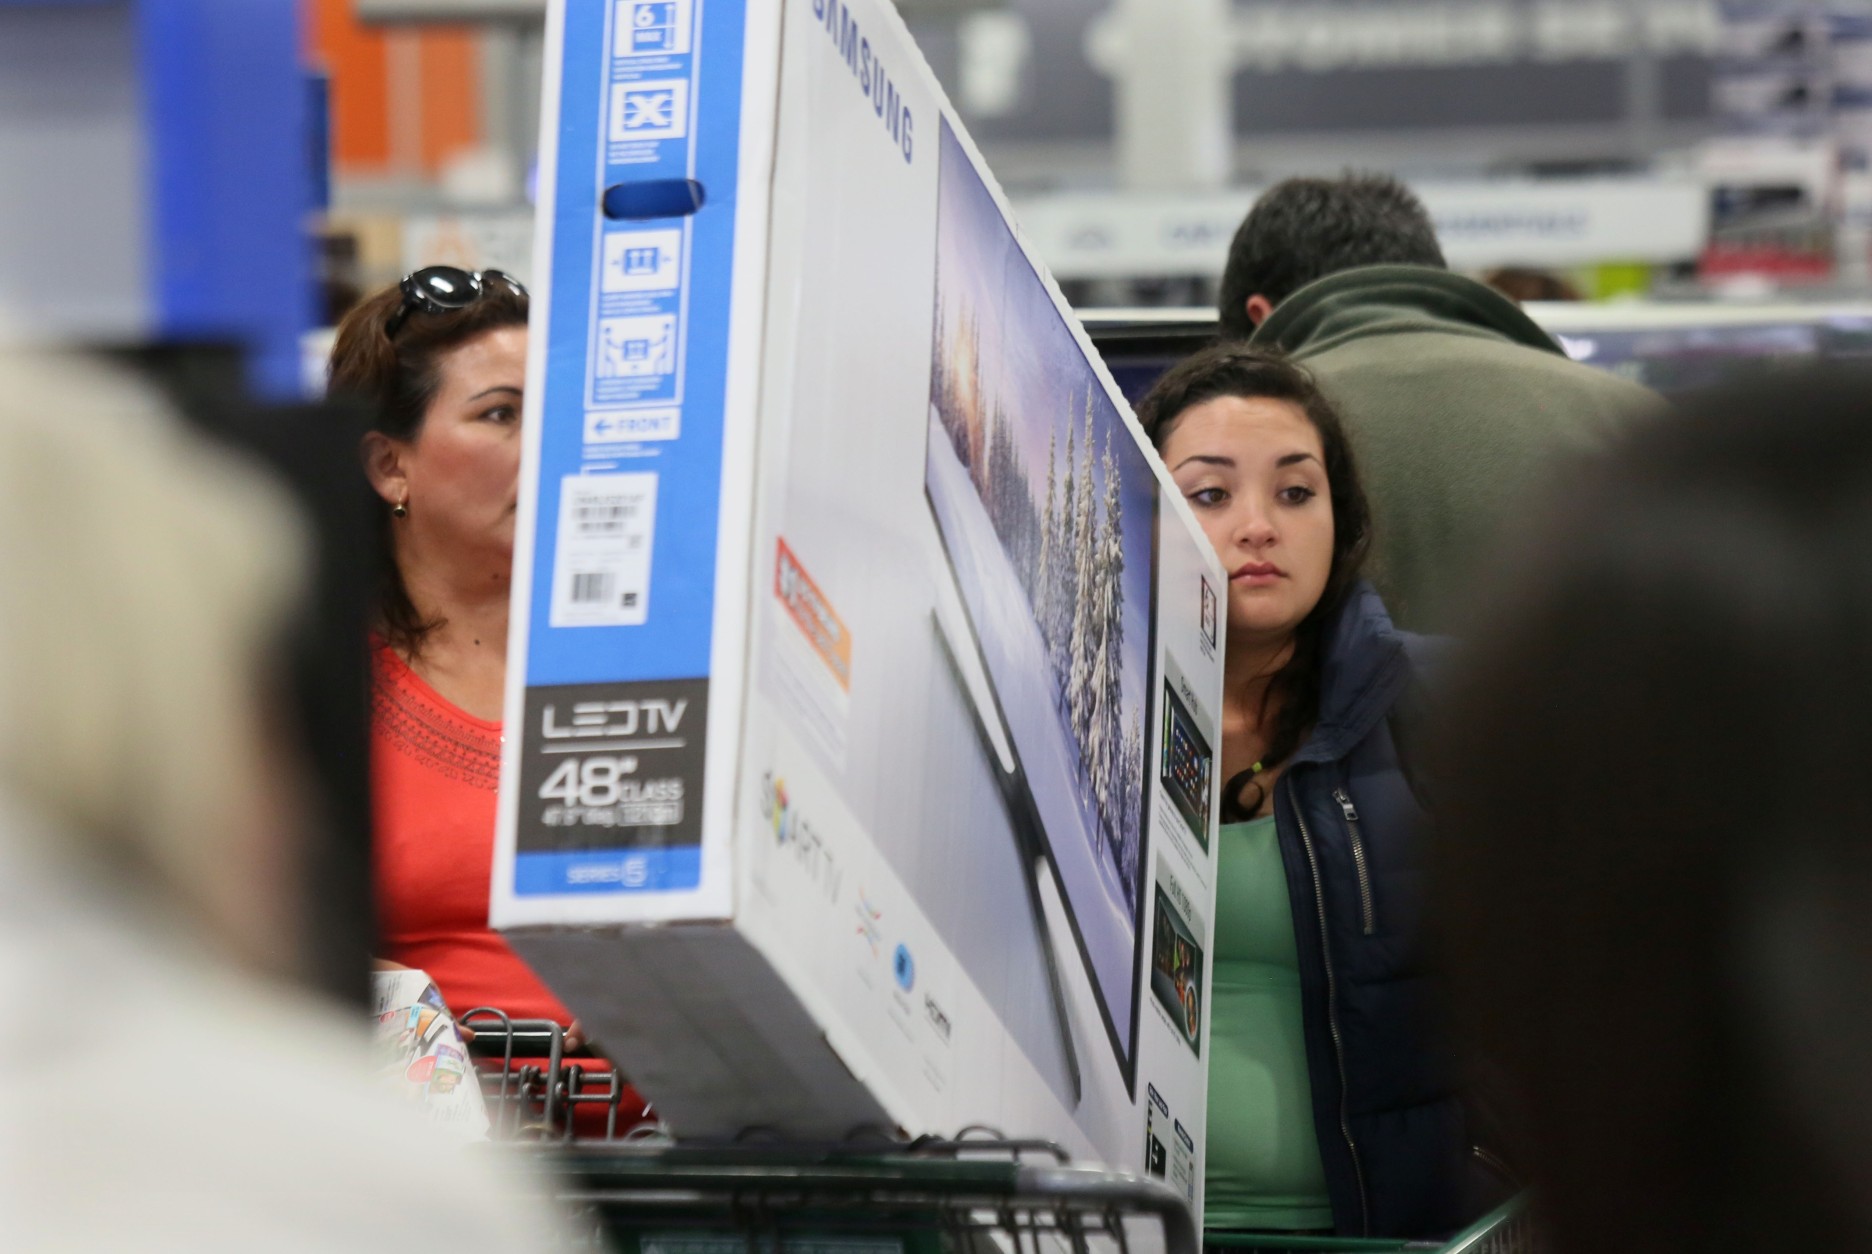 SAN DIEGO, CA - NOVEMBER 26:  Shoppers purchase electronics and other items at a Best Buy on November 26, 2015 in San Diego, California.  Although Black Friday sales are expected to be strong, many shoppers are opting to buy online or retailers are offering year round sales and other incentives that are expected to ease crowds. (Photo by Sandy Huffaker/Getty Images)